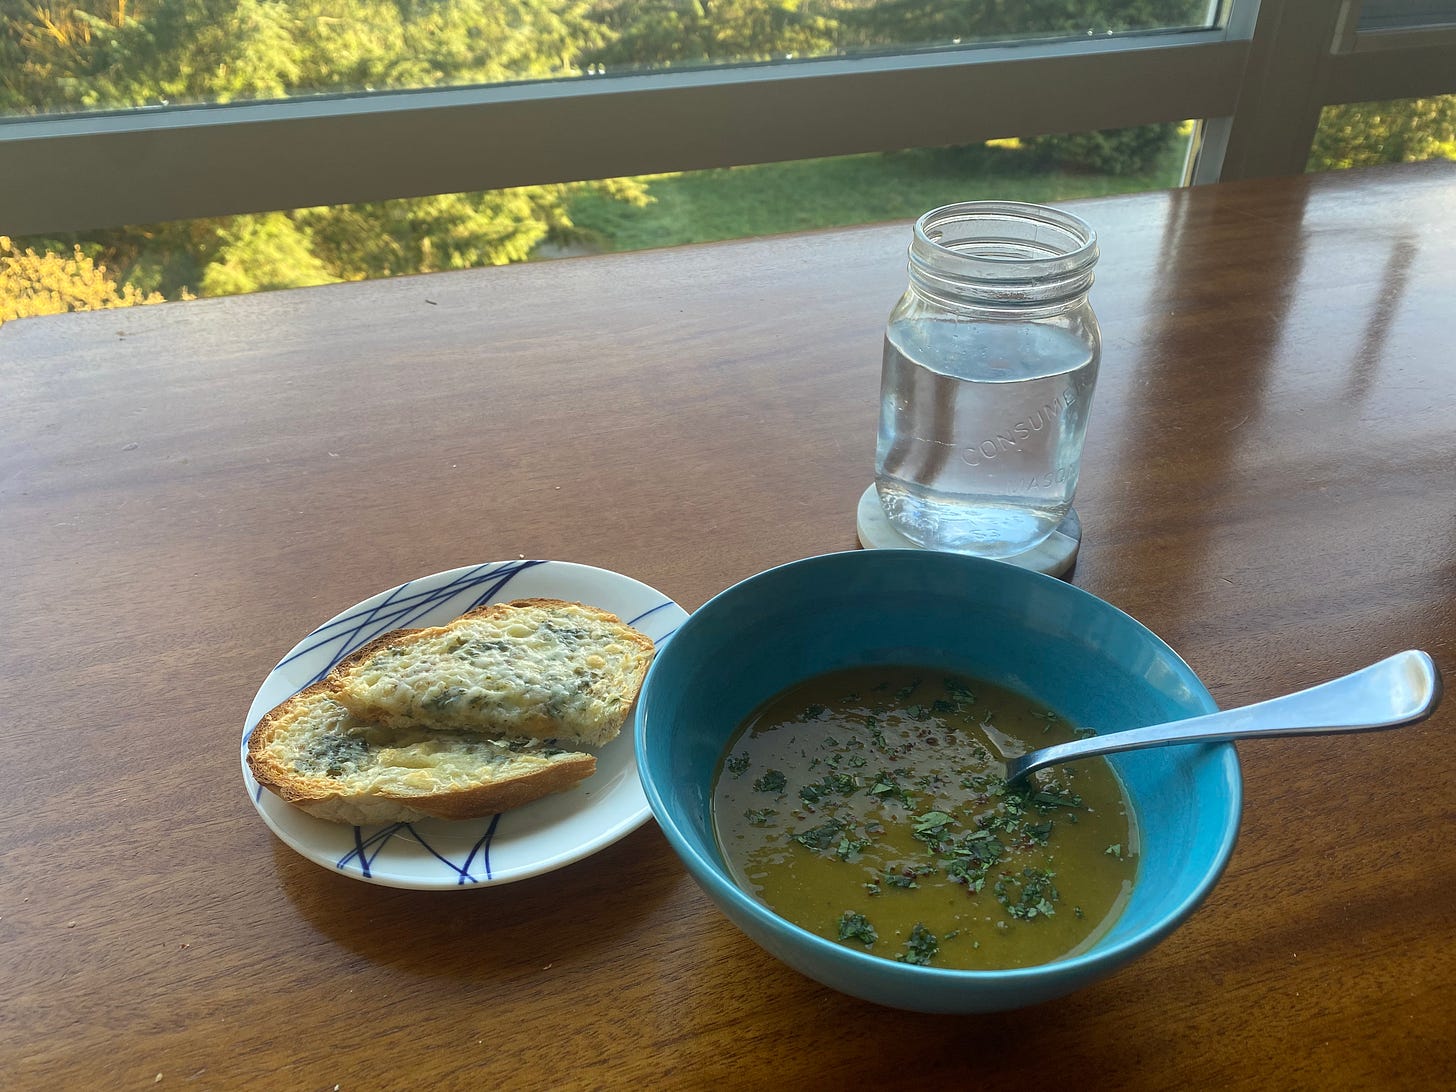 A blue bowl of light brown lentil & squash soup, topped with chili flakes and chopped cilantro, a spoon sticking out of the bowl. Next to it is a small white plate with cheesy toast, browned at the edges and with the cilantro visible beneath the white cheddar. A mason jar of water sits on a coaster, and the light in the trees is just visible out the window at the top of the frame.